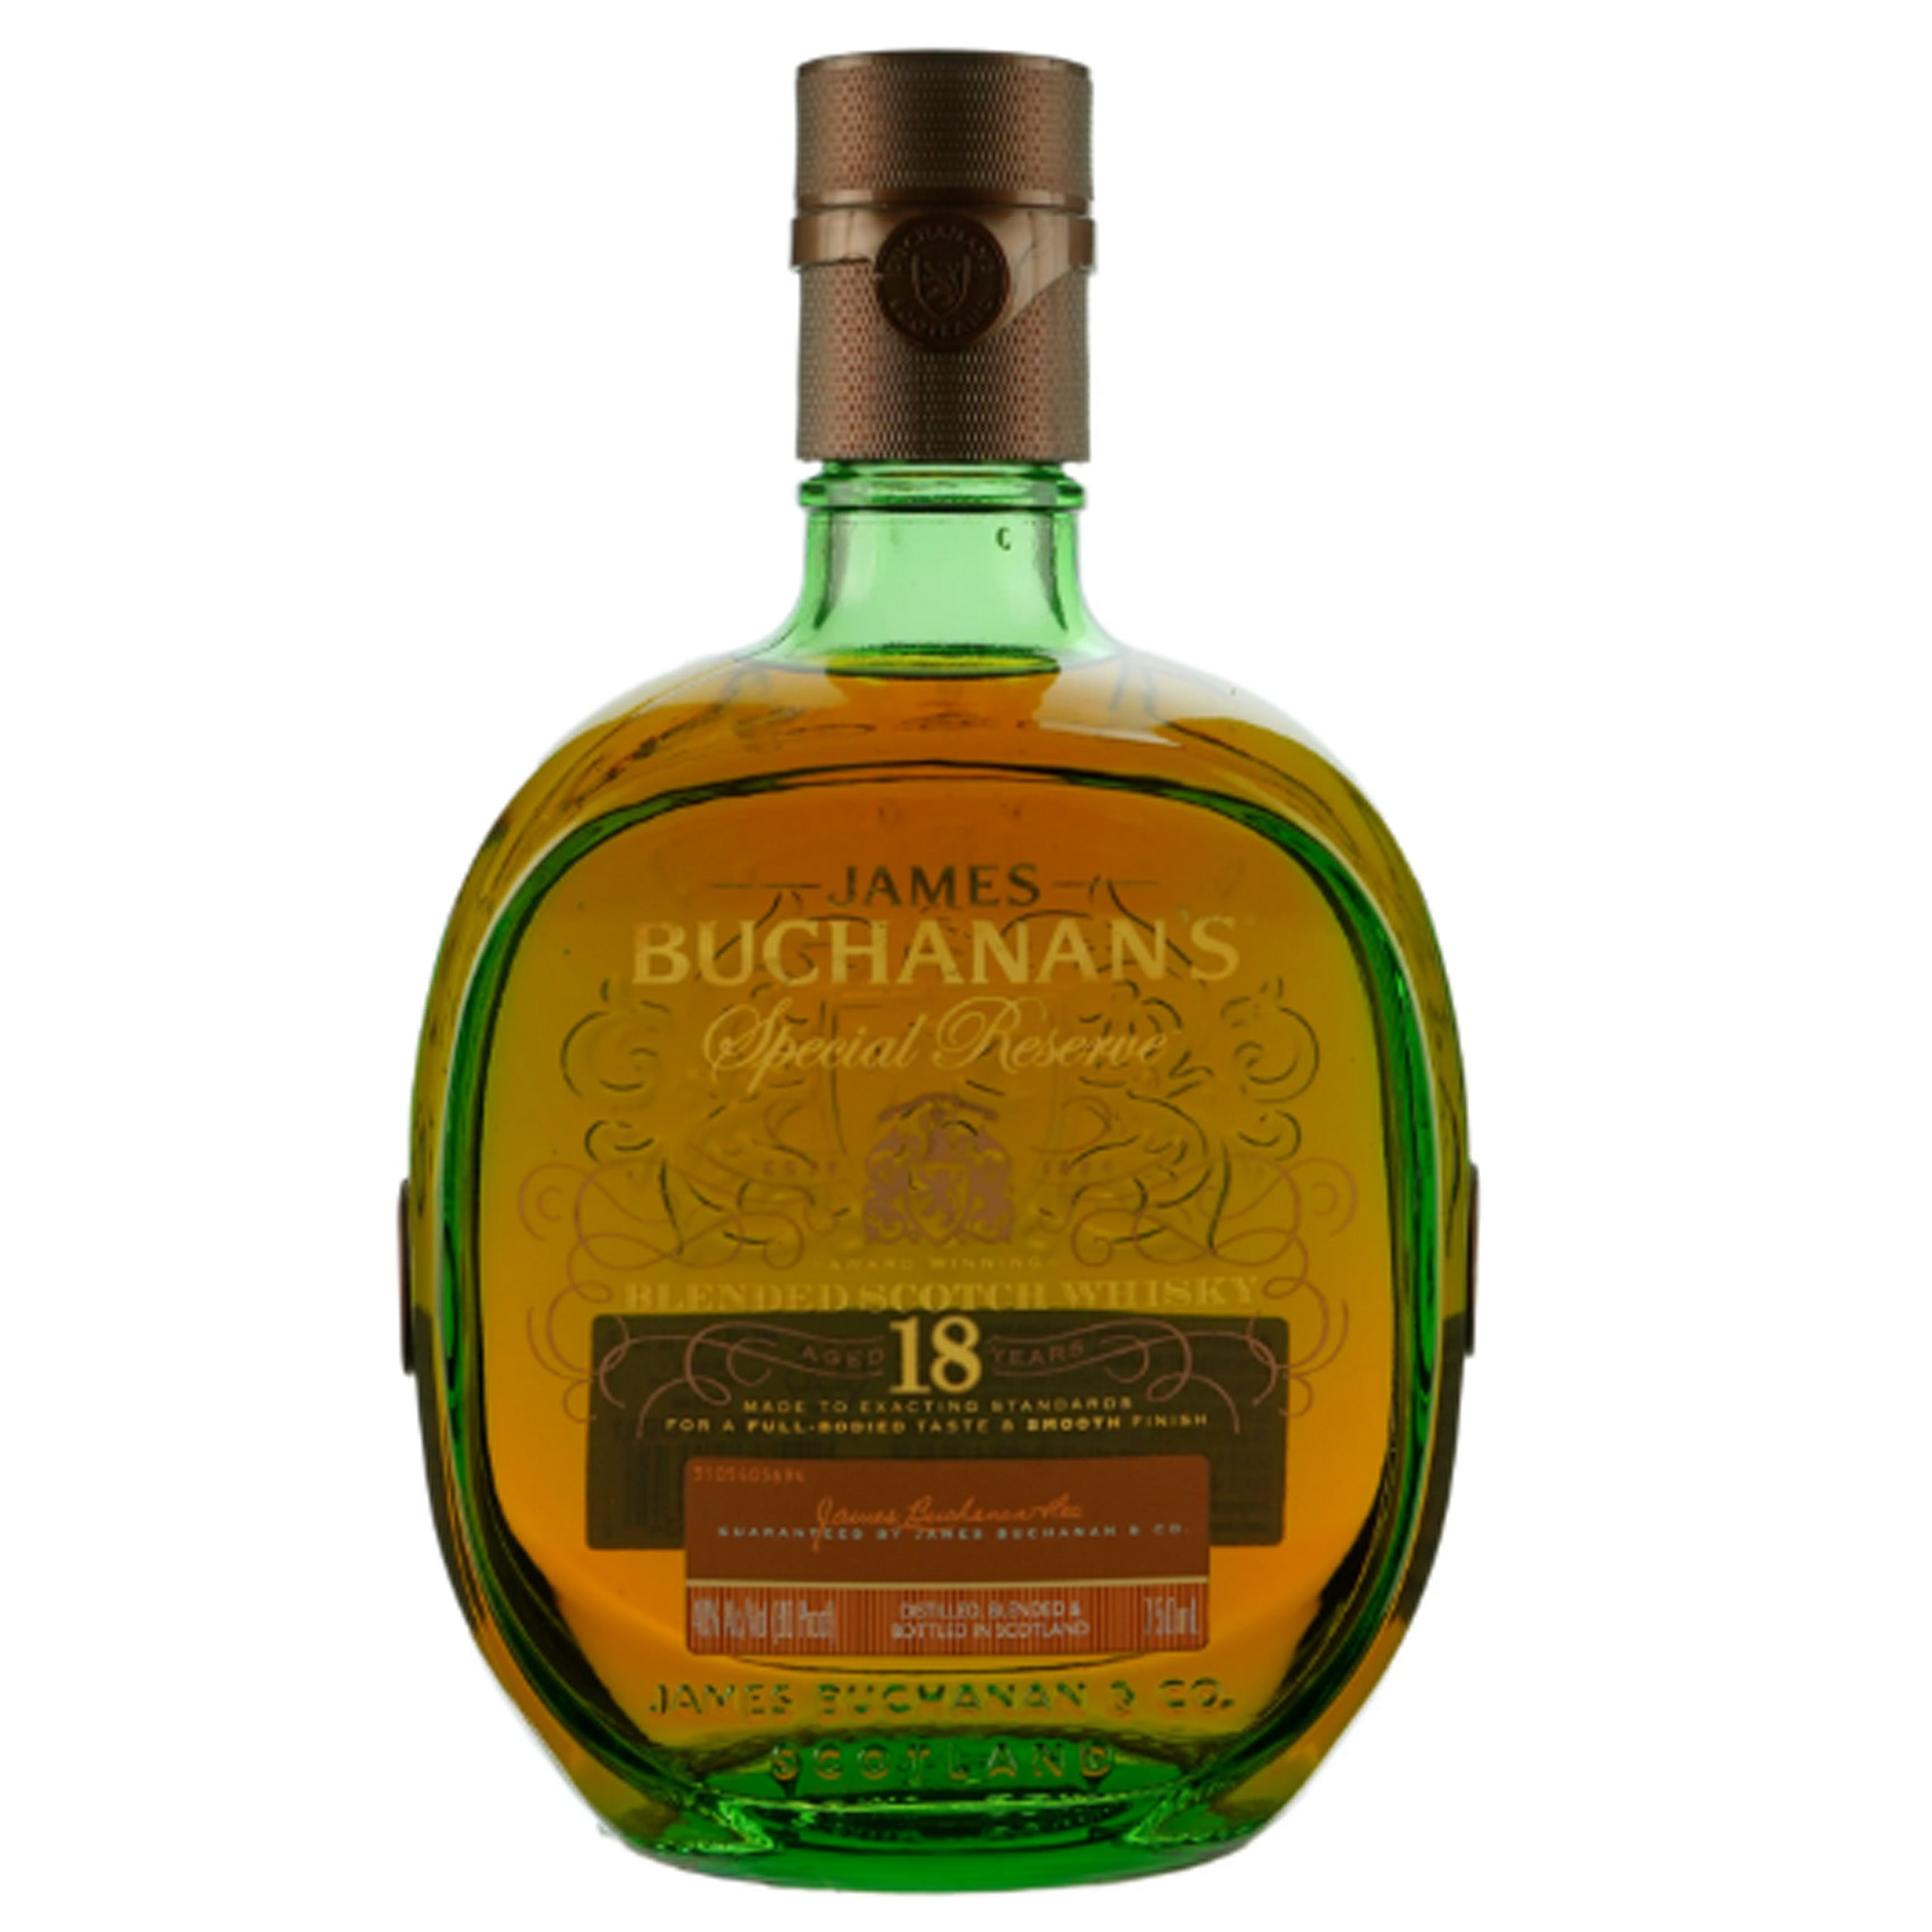 Buchanan's Special Reserve 18 Year Old Blended Scotch Whisky